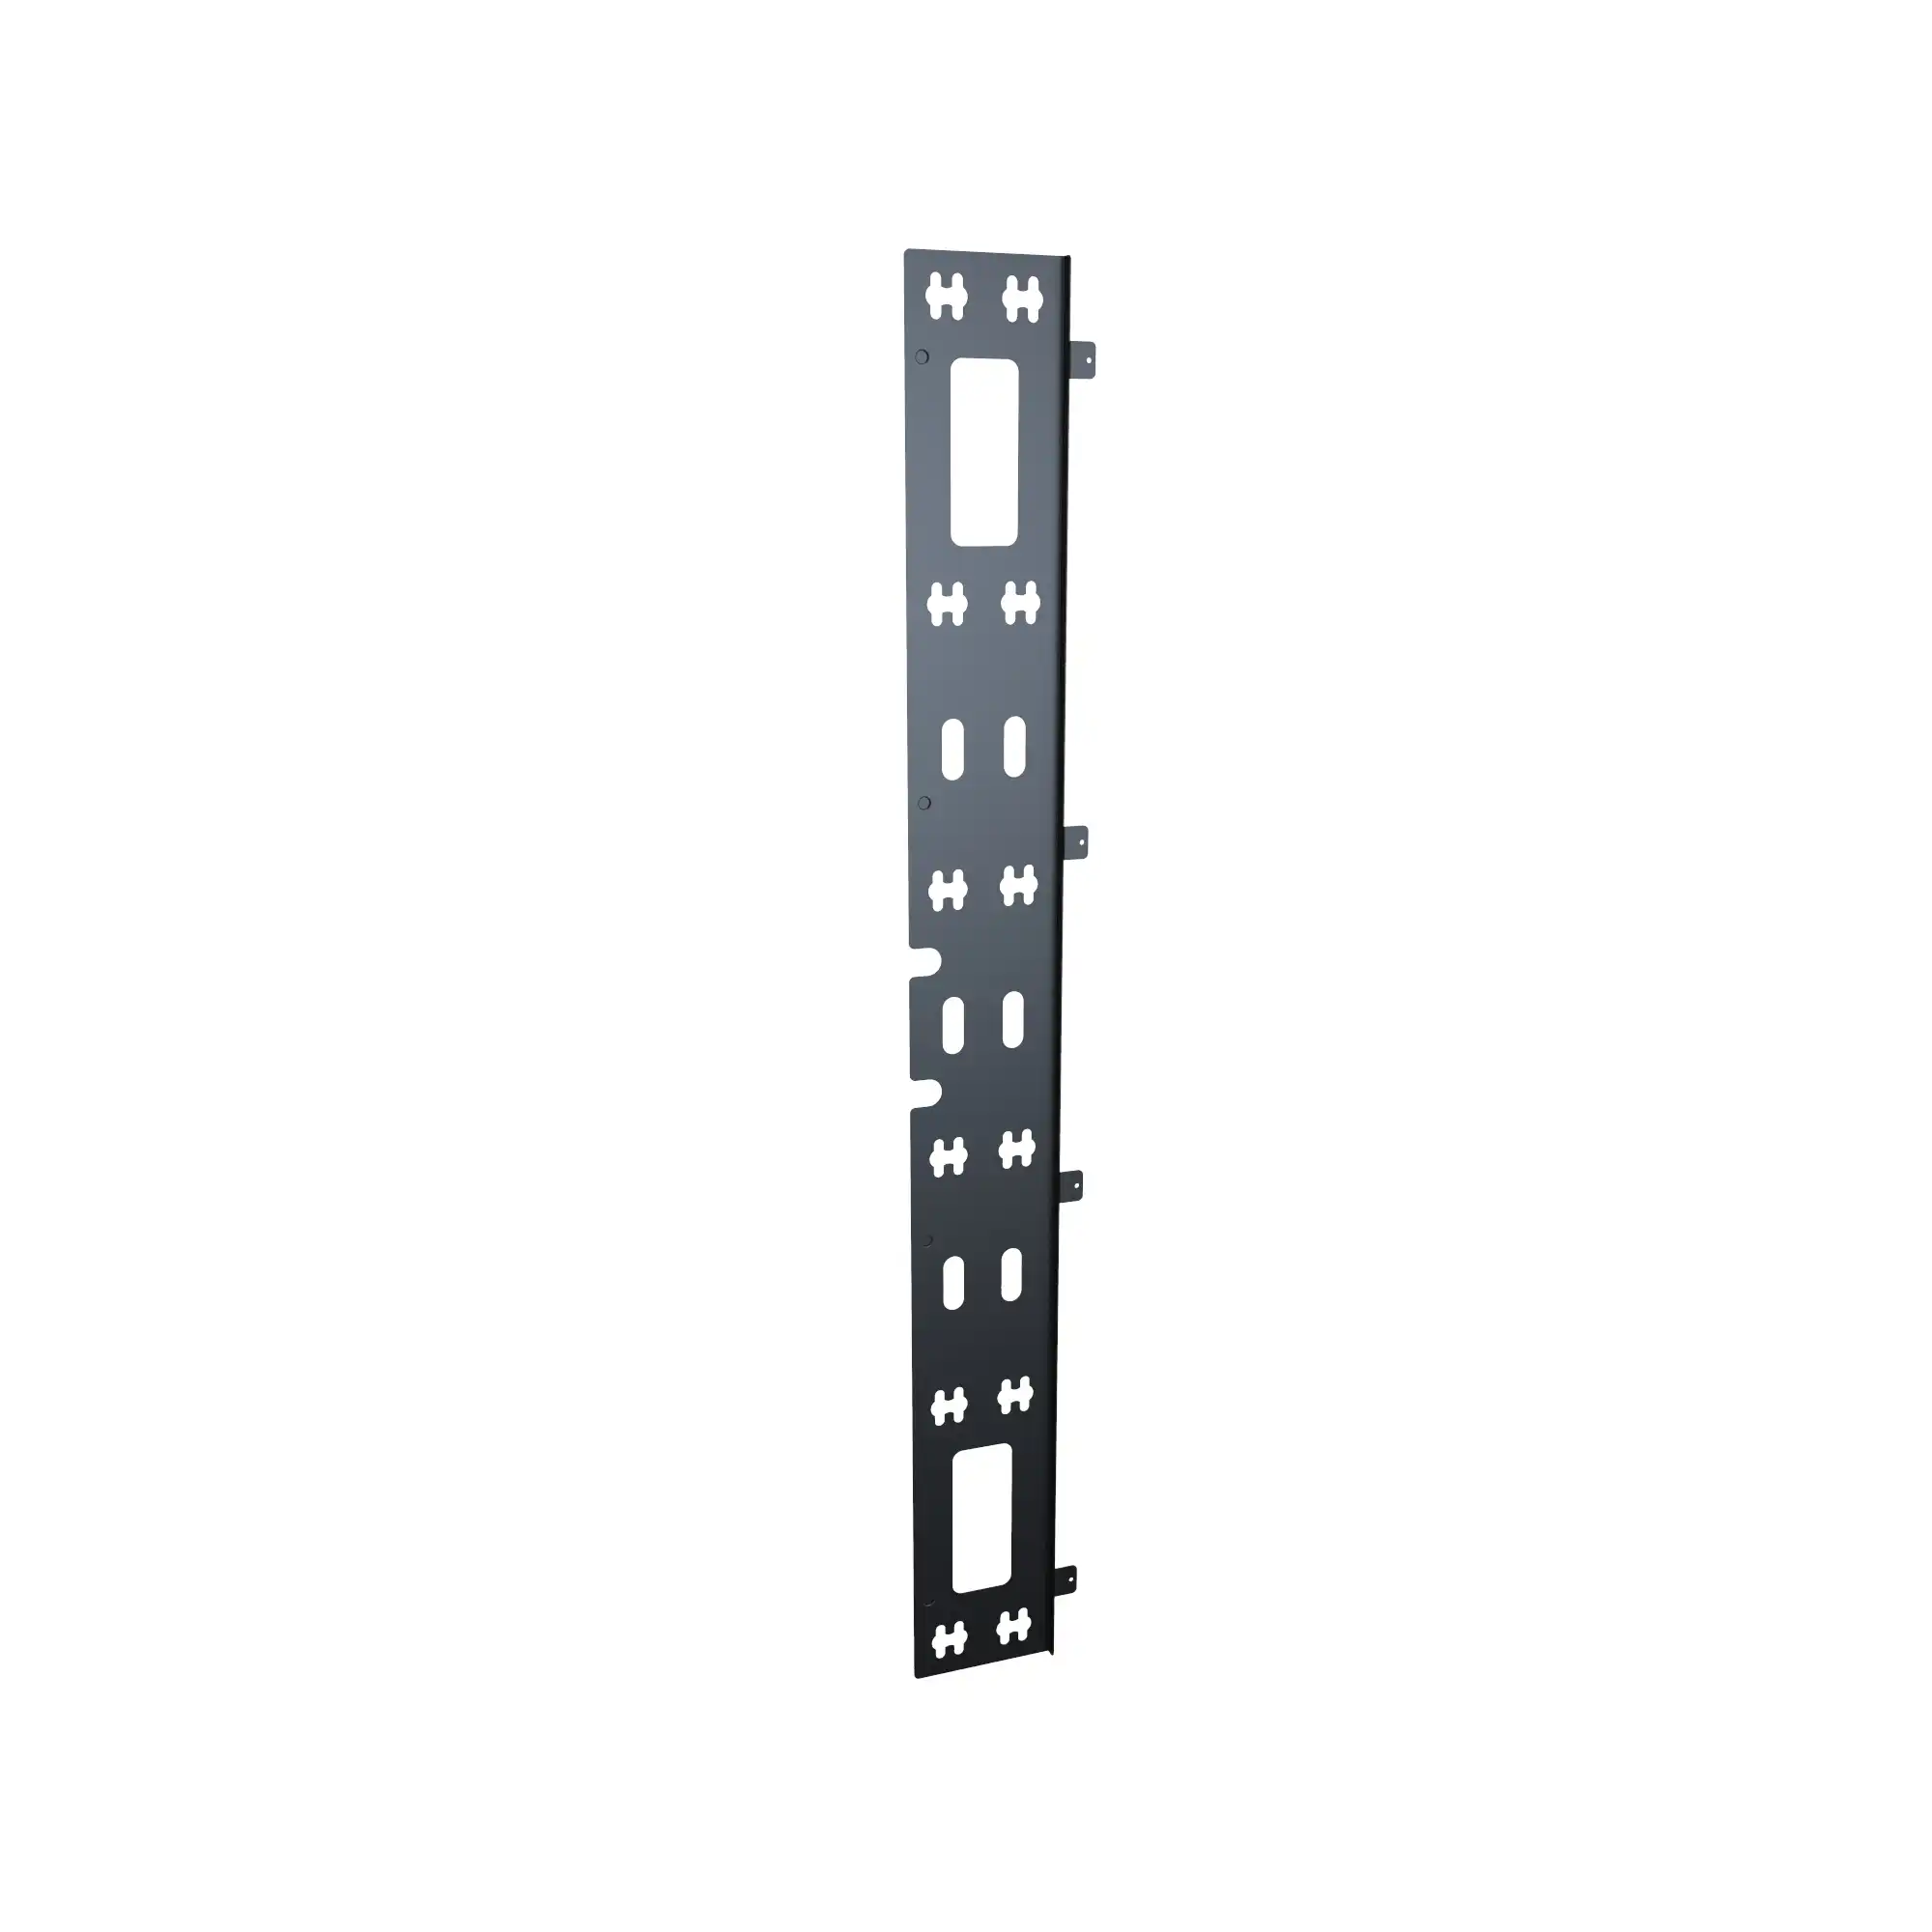 H1PDU Series - Hammond Manufacturing Rack Solutions at KGA Enclosures Ltd - Click for a larger image